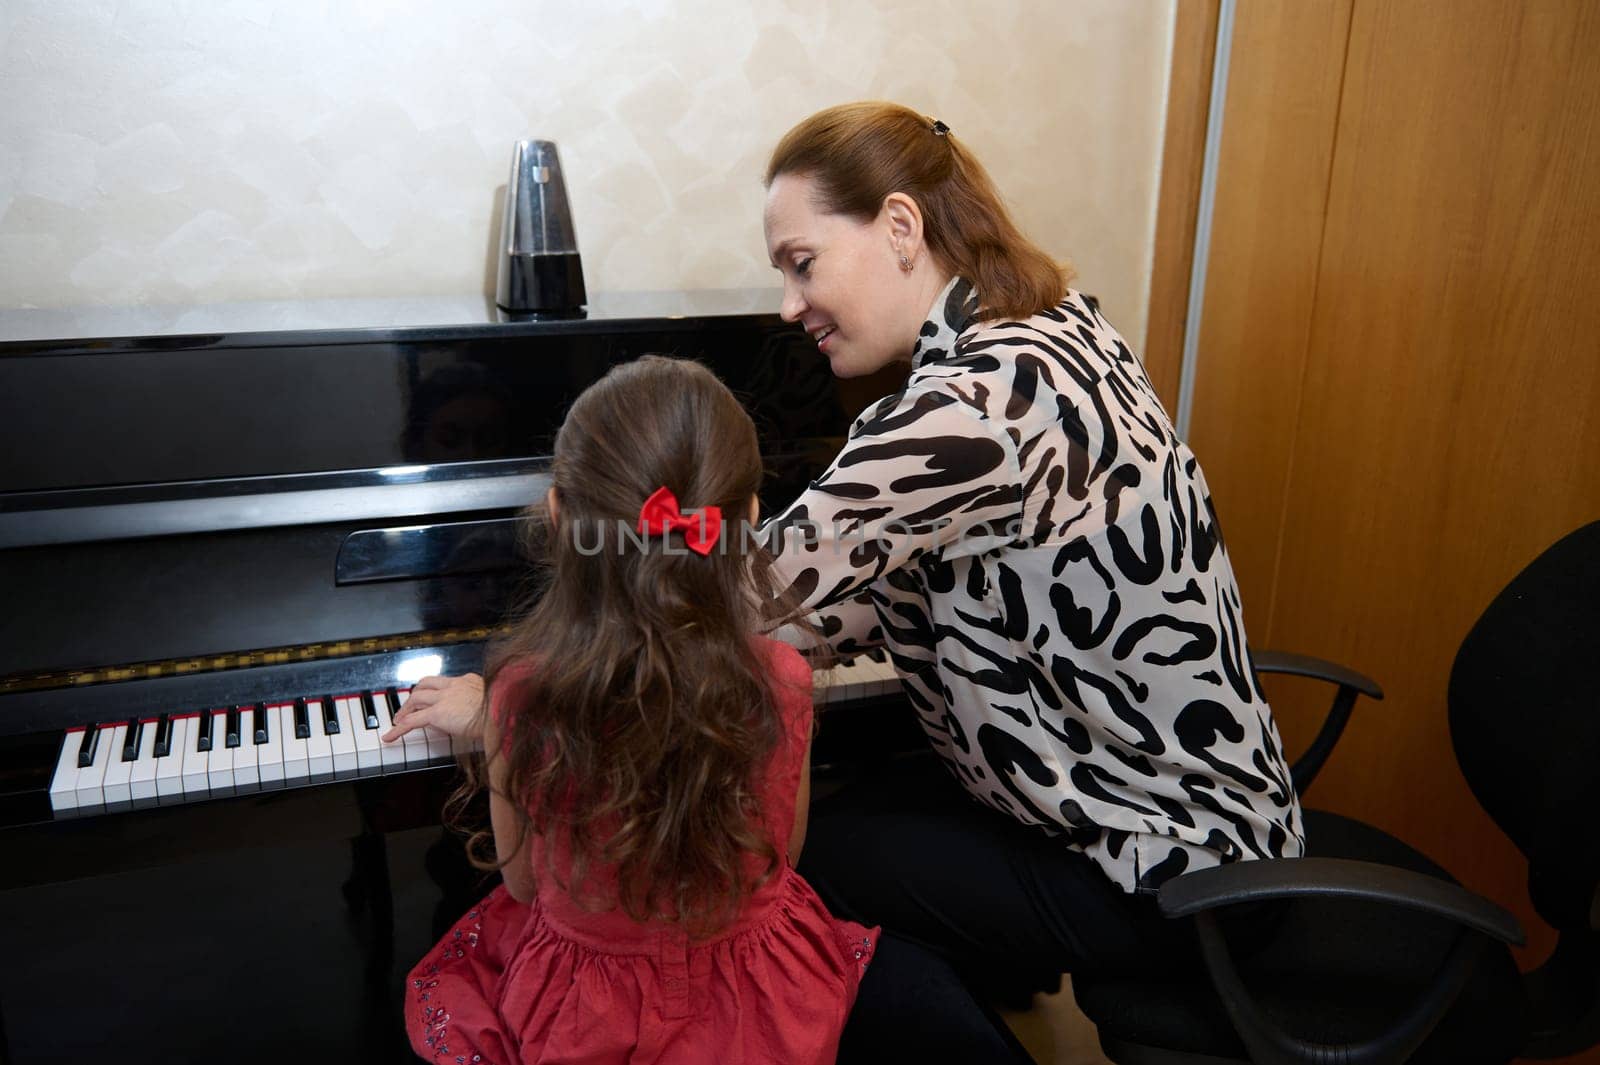 Inspired happy woman pianist, music teacher performing melody on piano forte, explaining piano lesson to a child girl, sitting nearby on a stool. Musical education and talent development in progress by artgf